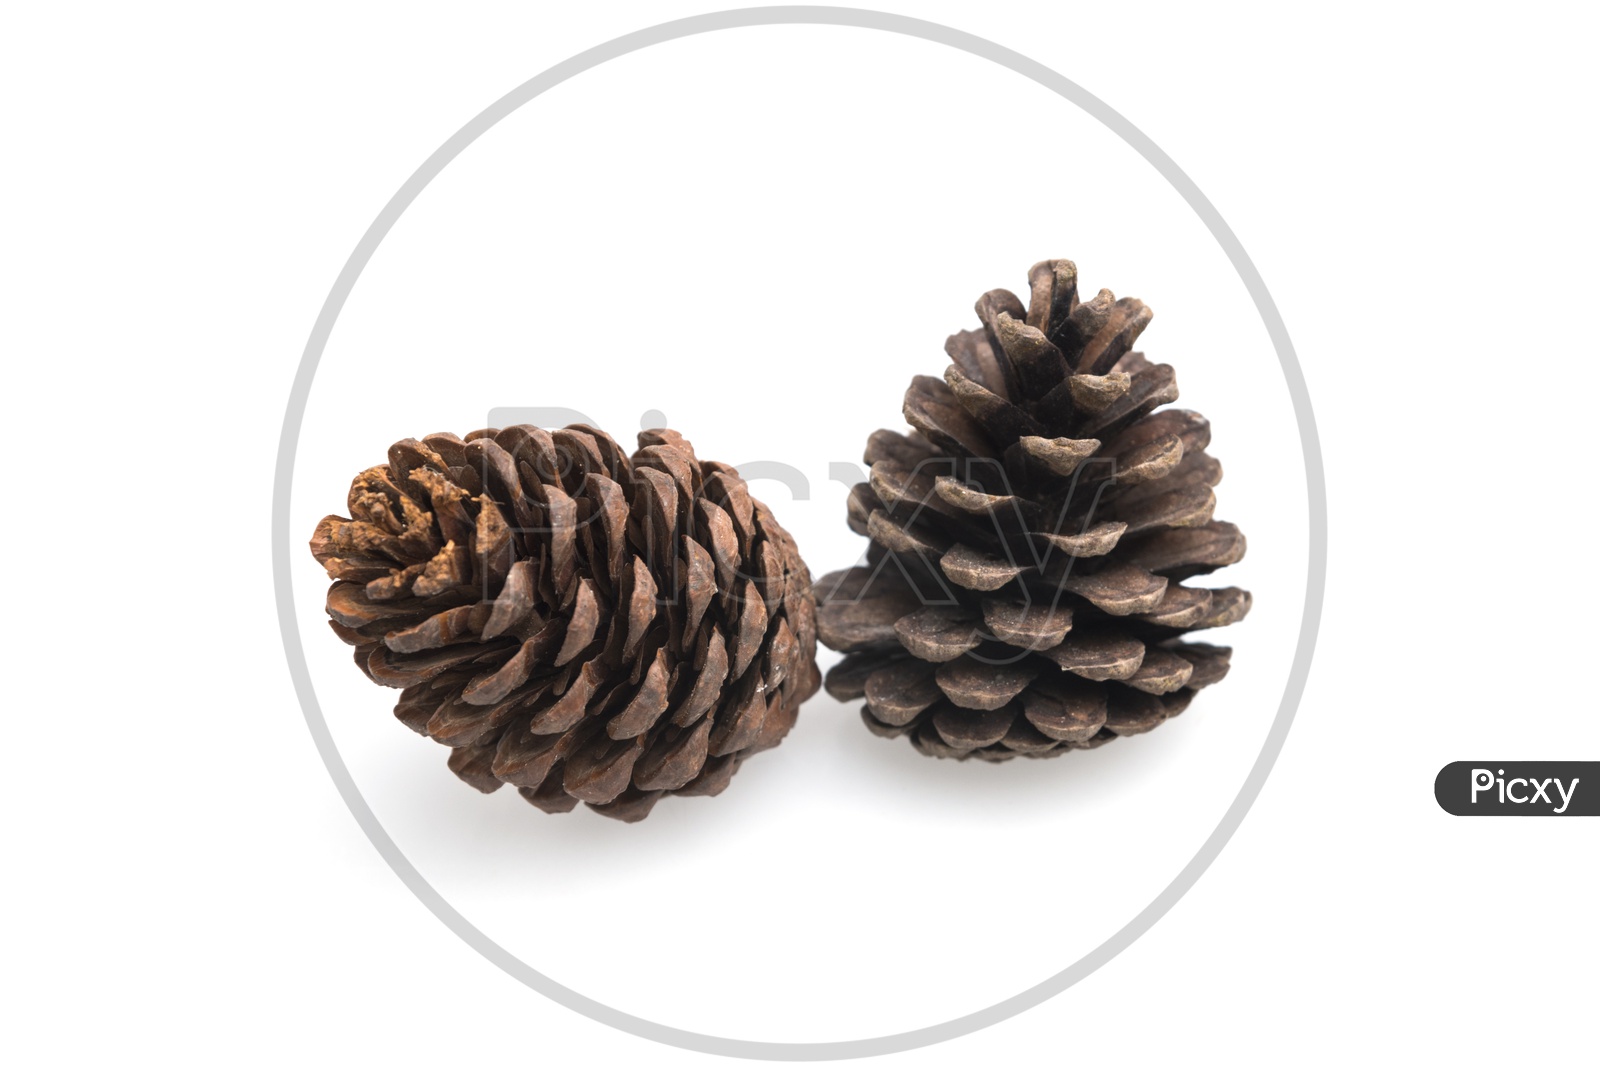 Two Pine cones of Thailand